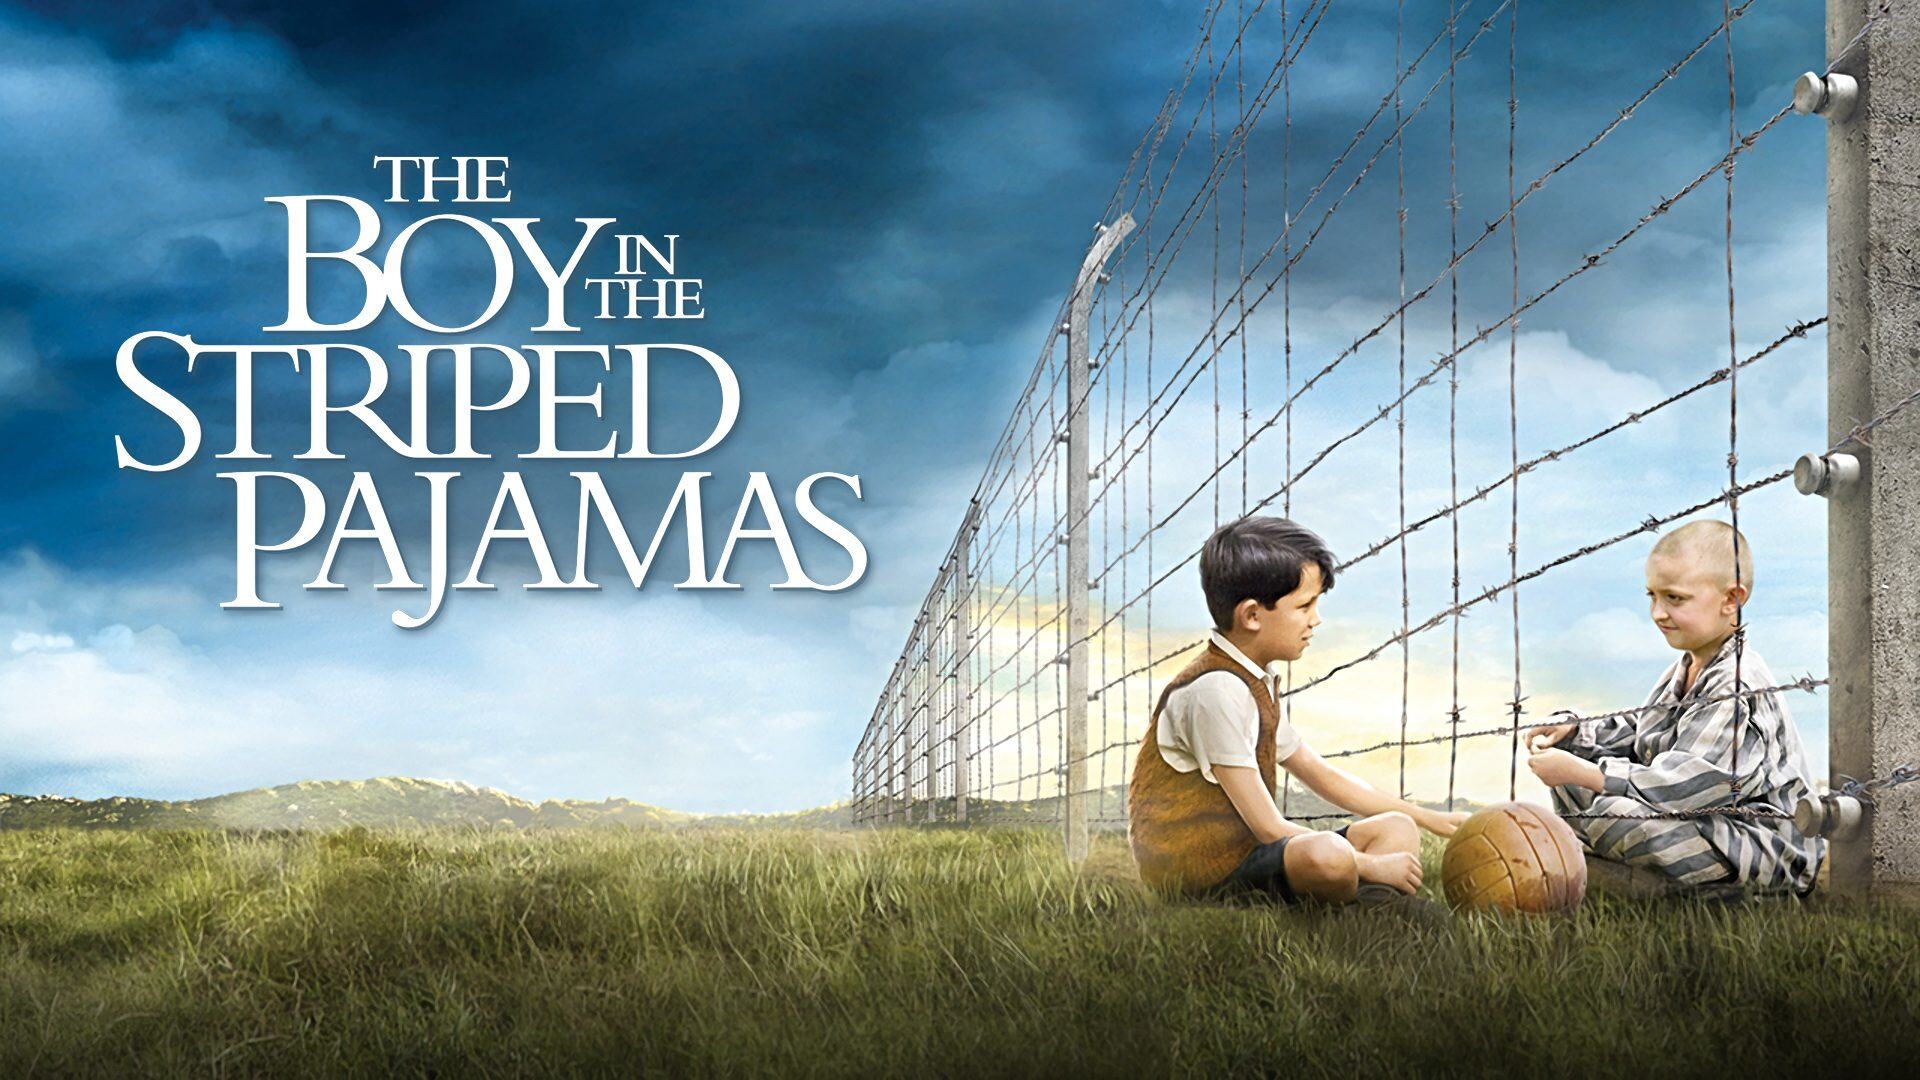 42-facts-about-the-movie-the-boy-in-the-striped-pajamas